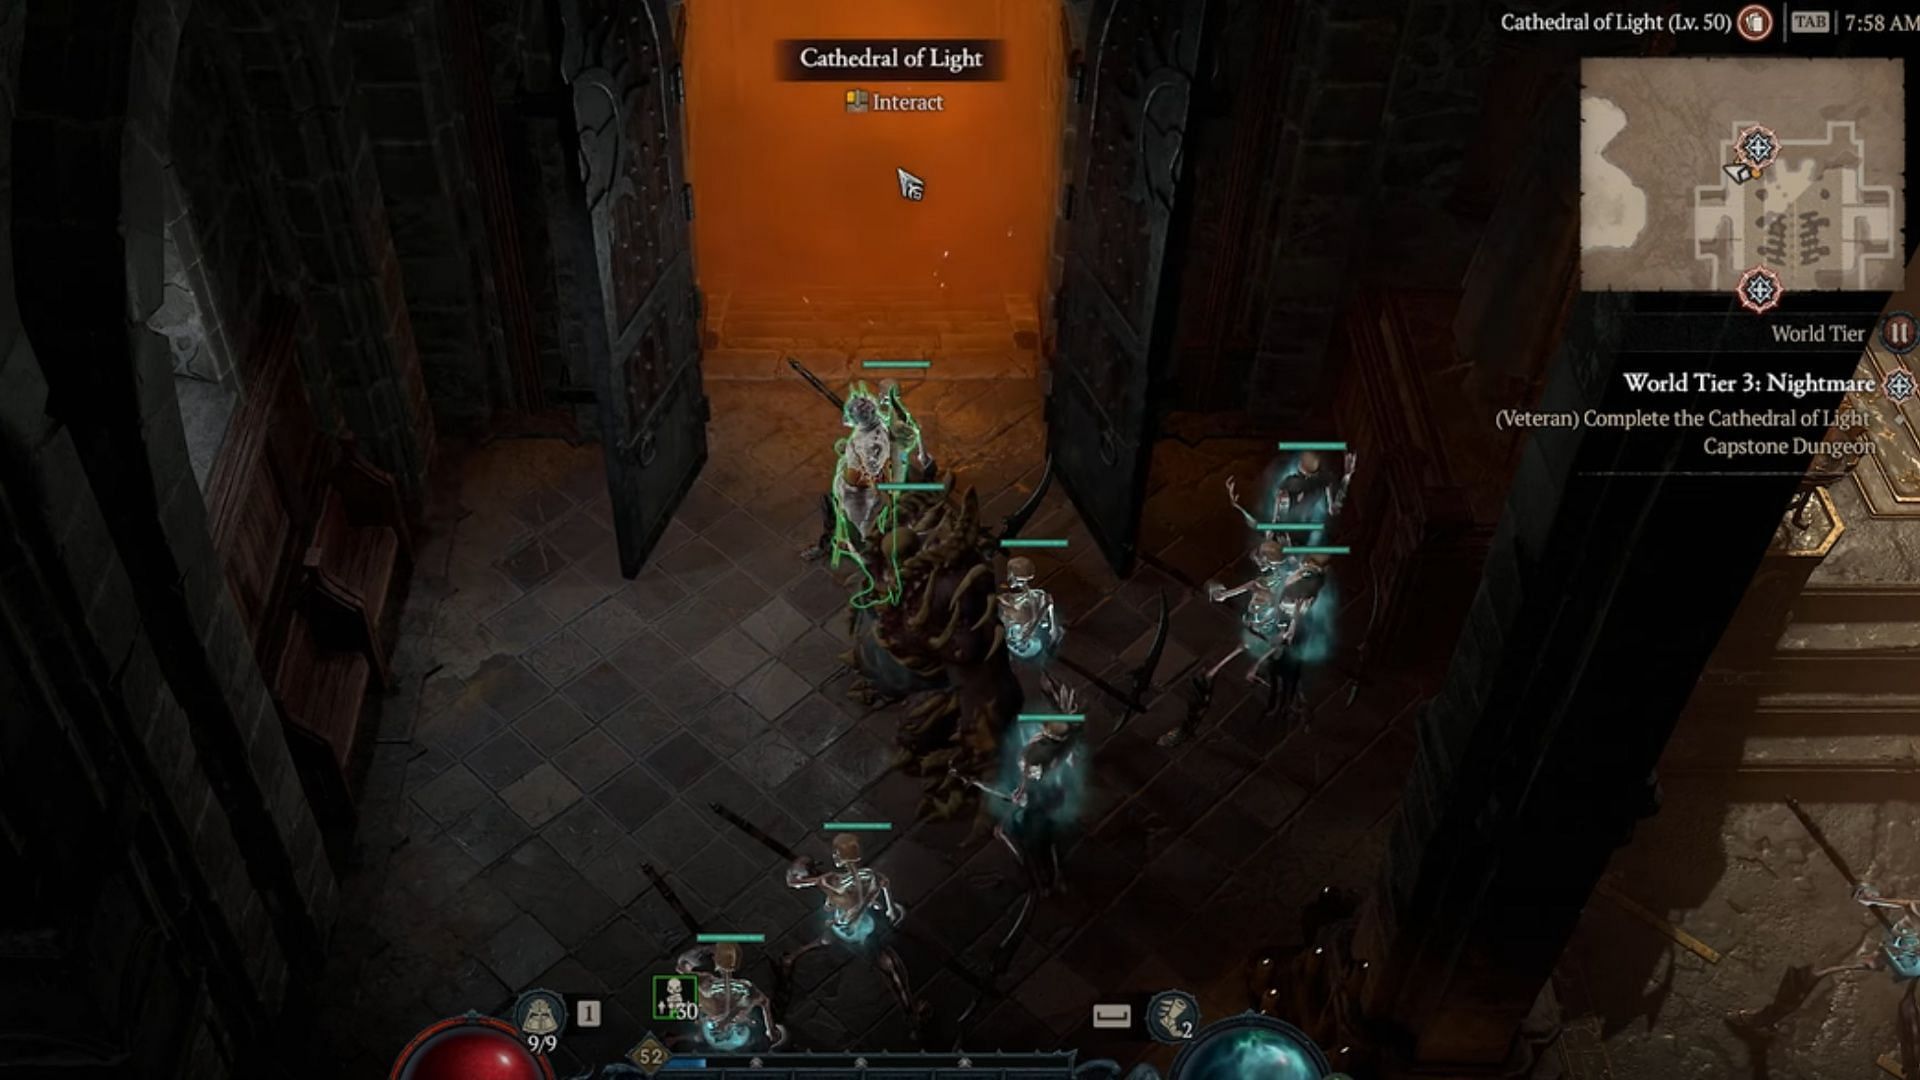 Cathedral of Light Capstone Dungeon challenge. (Image via Blizzard Entertainment)